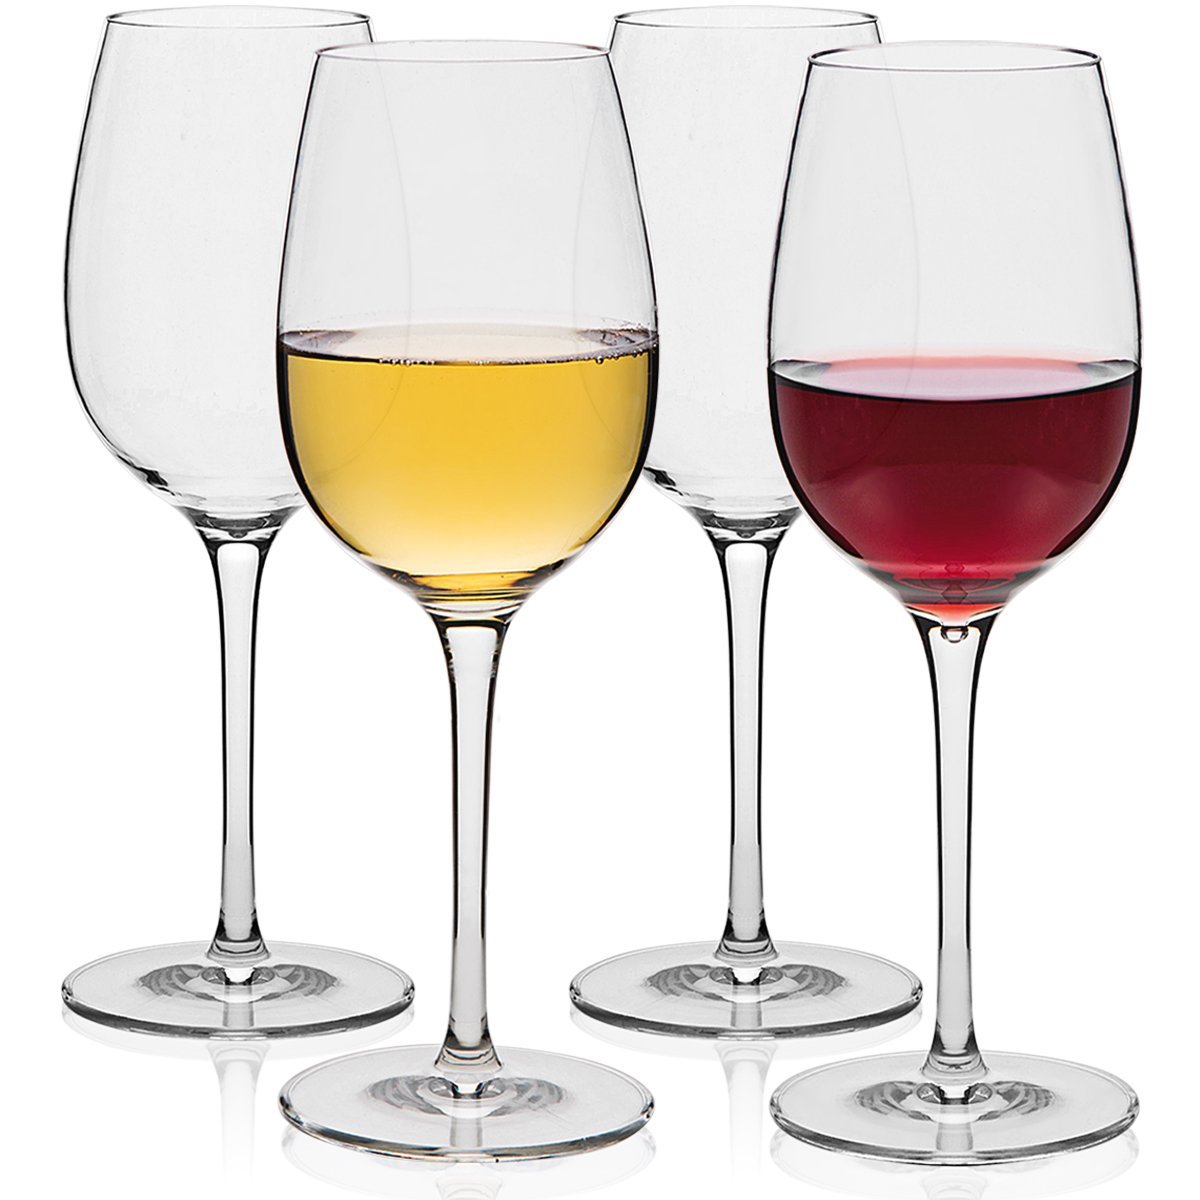 Best plastic wine glasses overall top pick Michely wine glasses